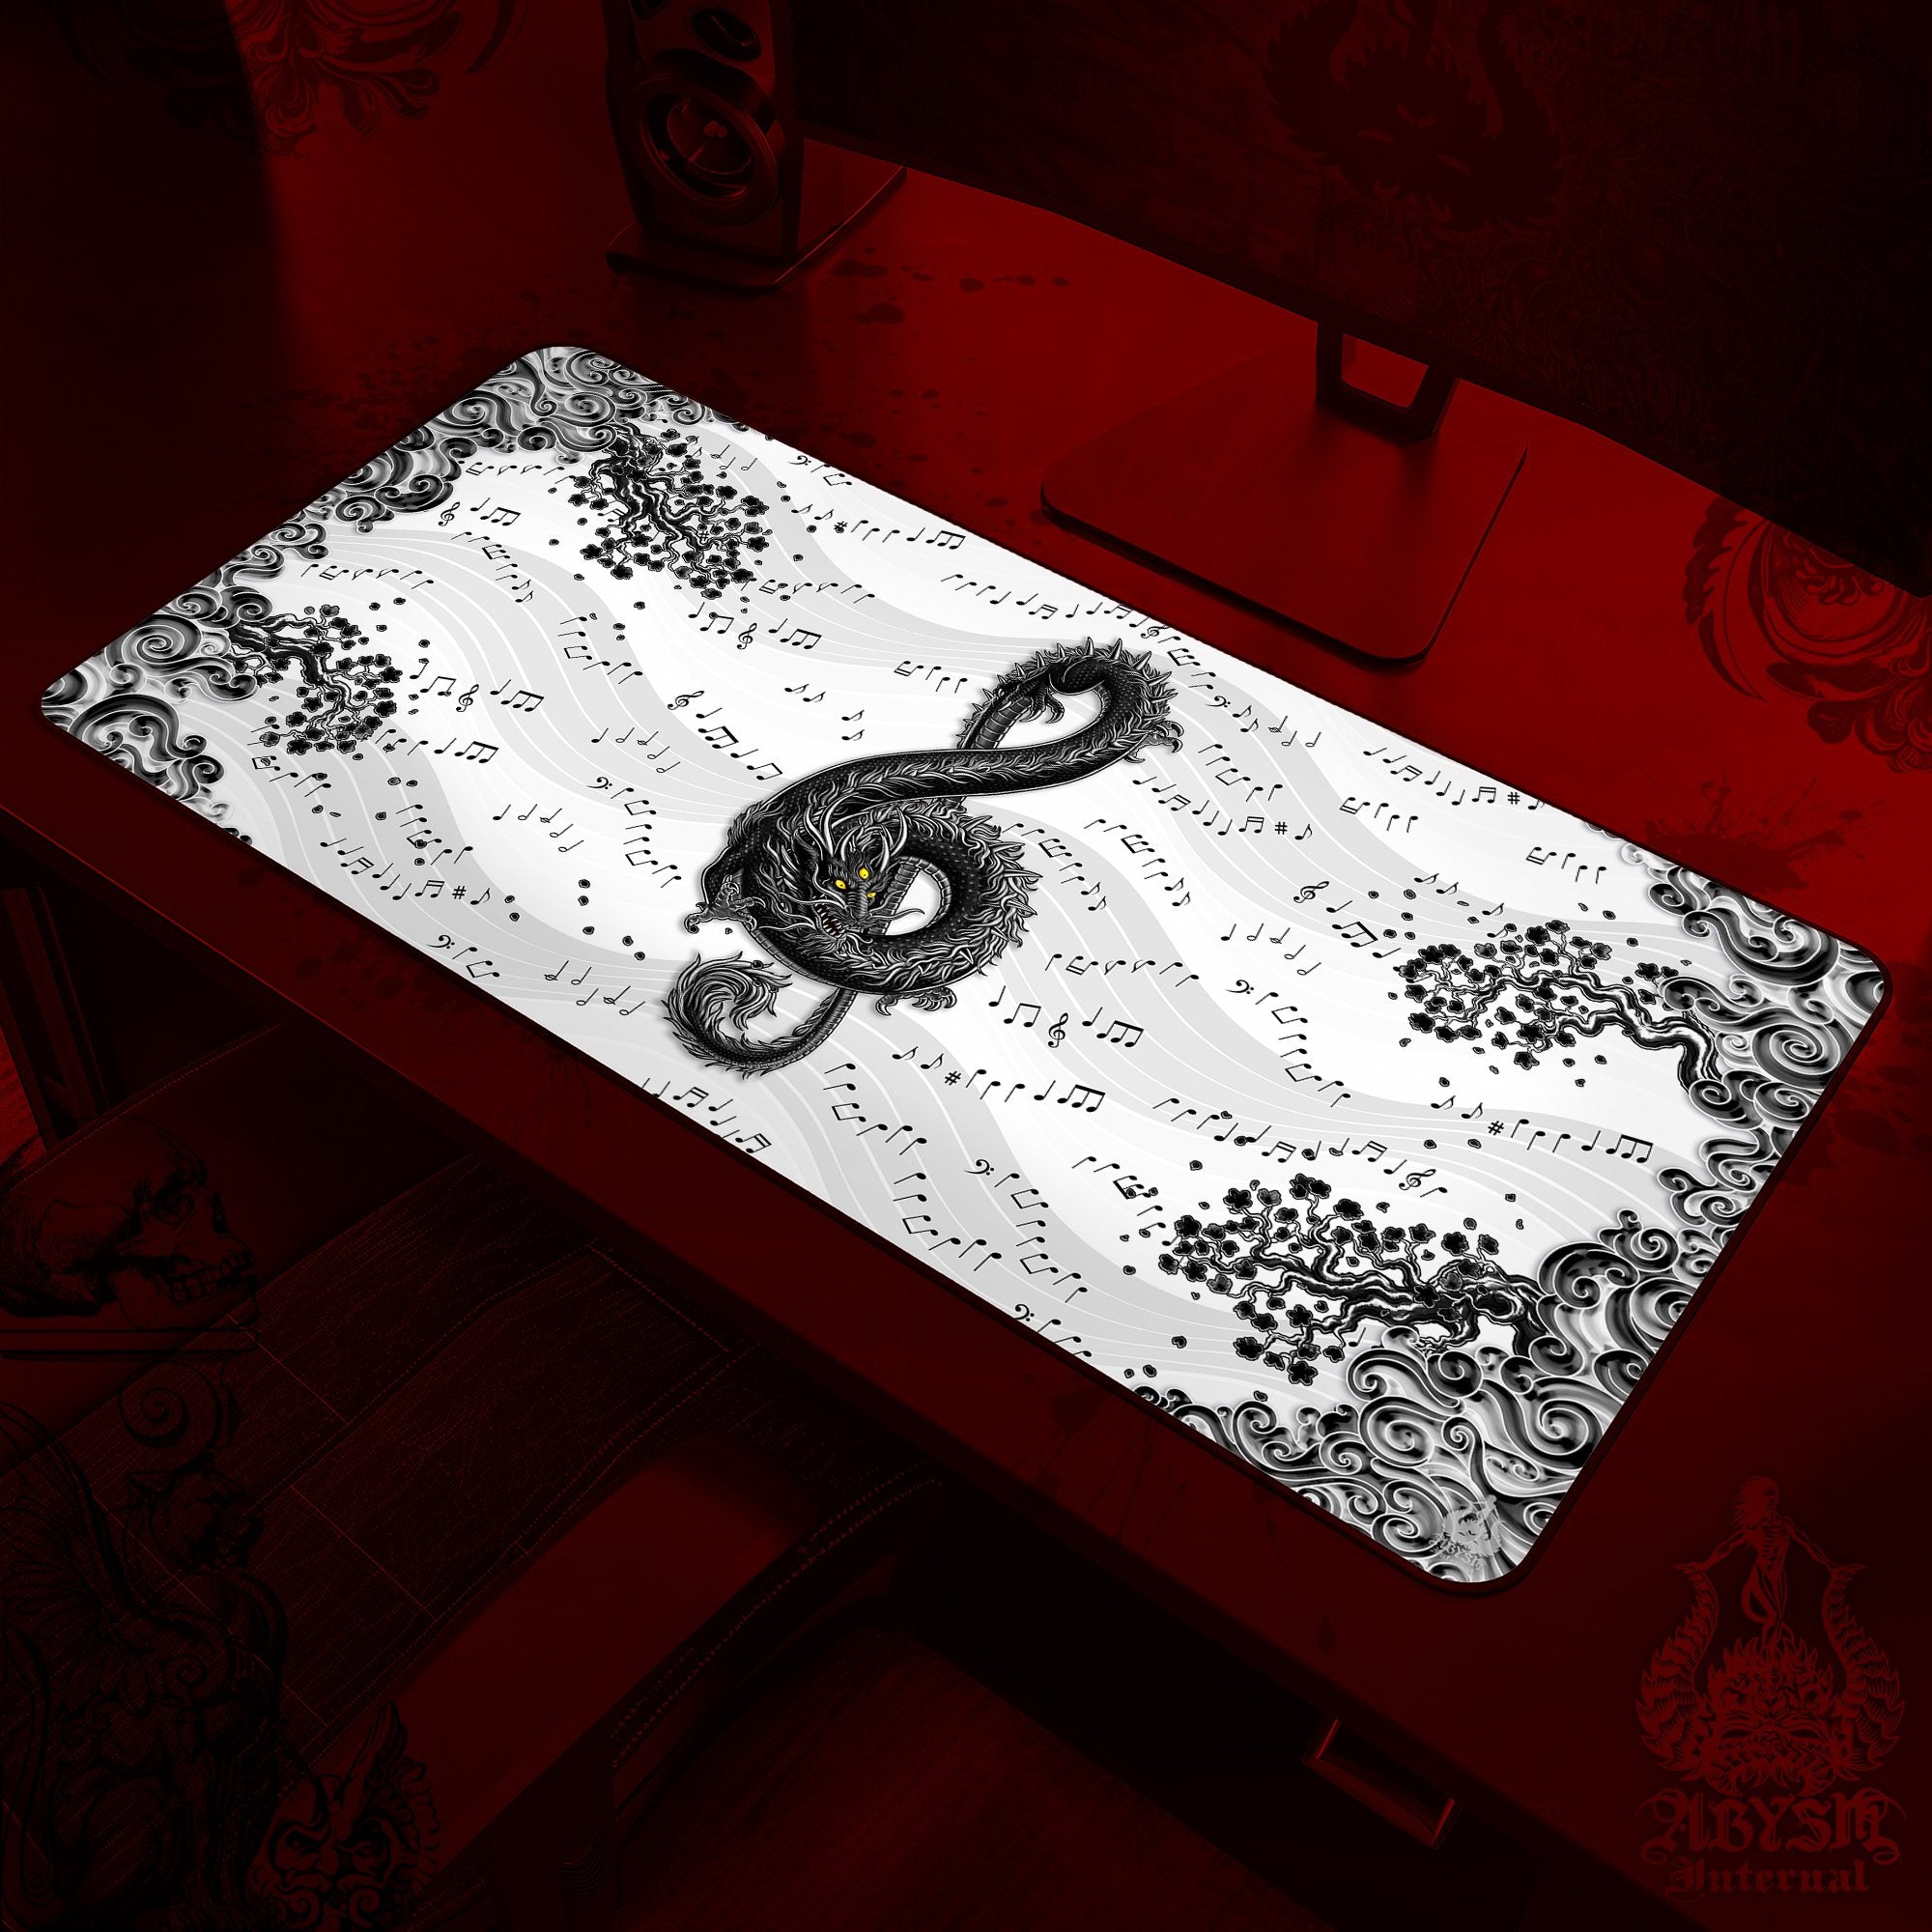 Gothic Dragon Gaming Desk Mat, Music Mouse Pad, White Goth Table Protector Cover, Asian Workpad, Treble Clef Art Print - Black, 2 Options - Abysm Internal